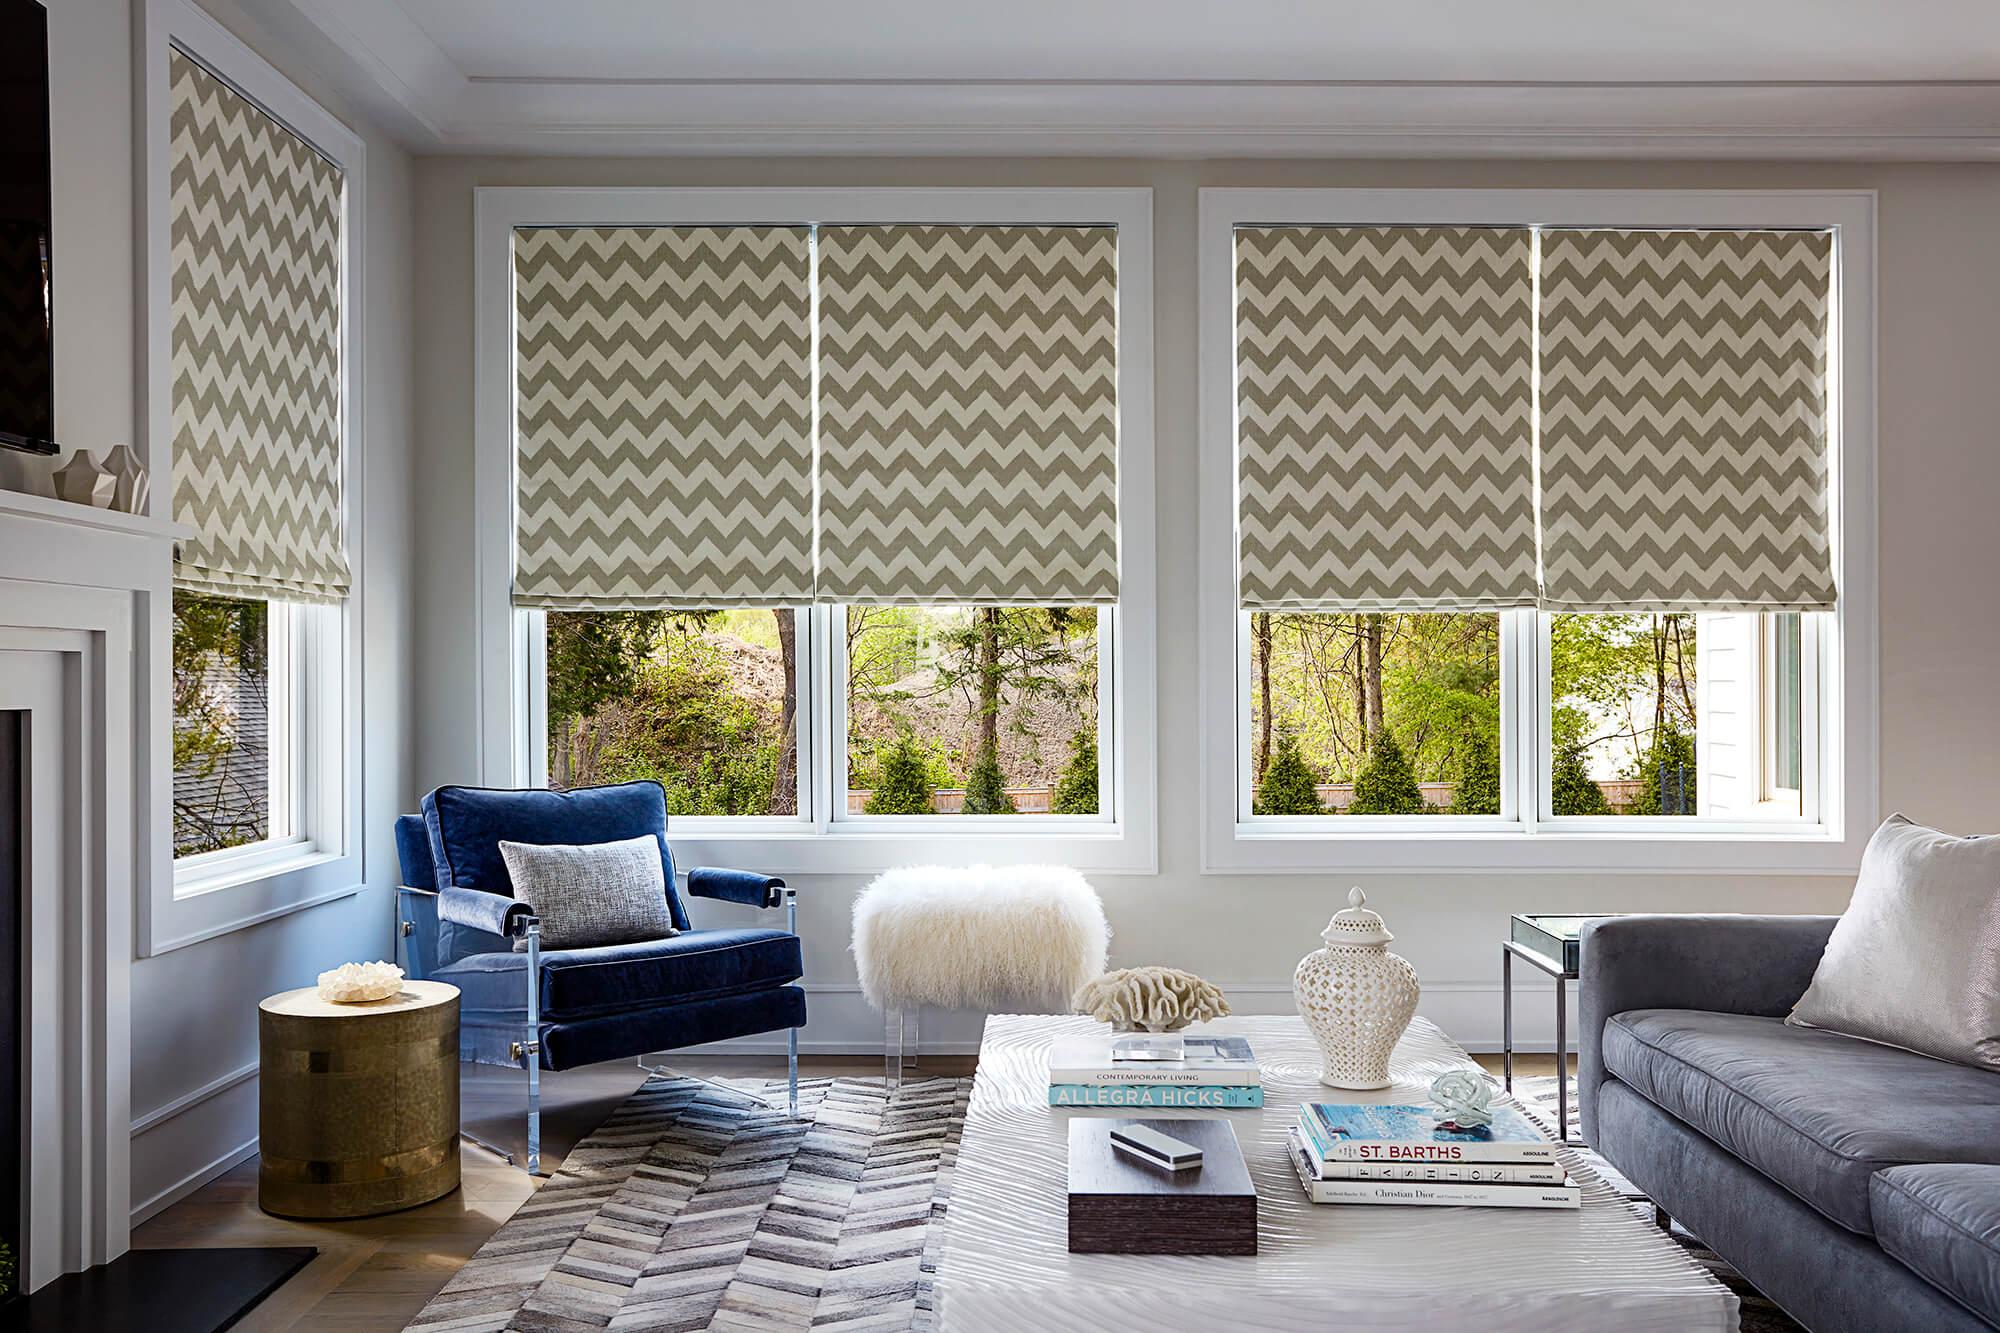 Custom Made Blinds and Shades | Blinds To Go